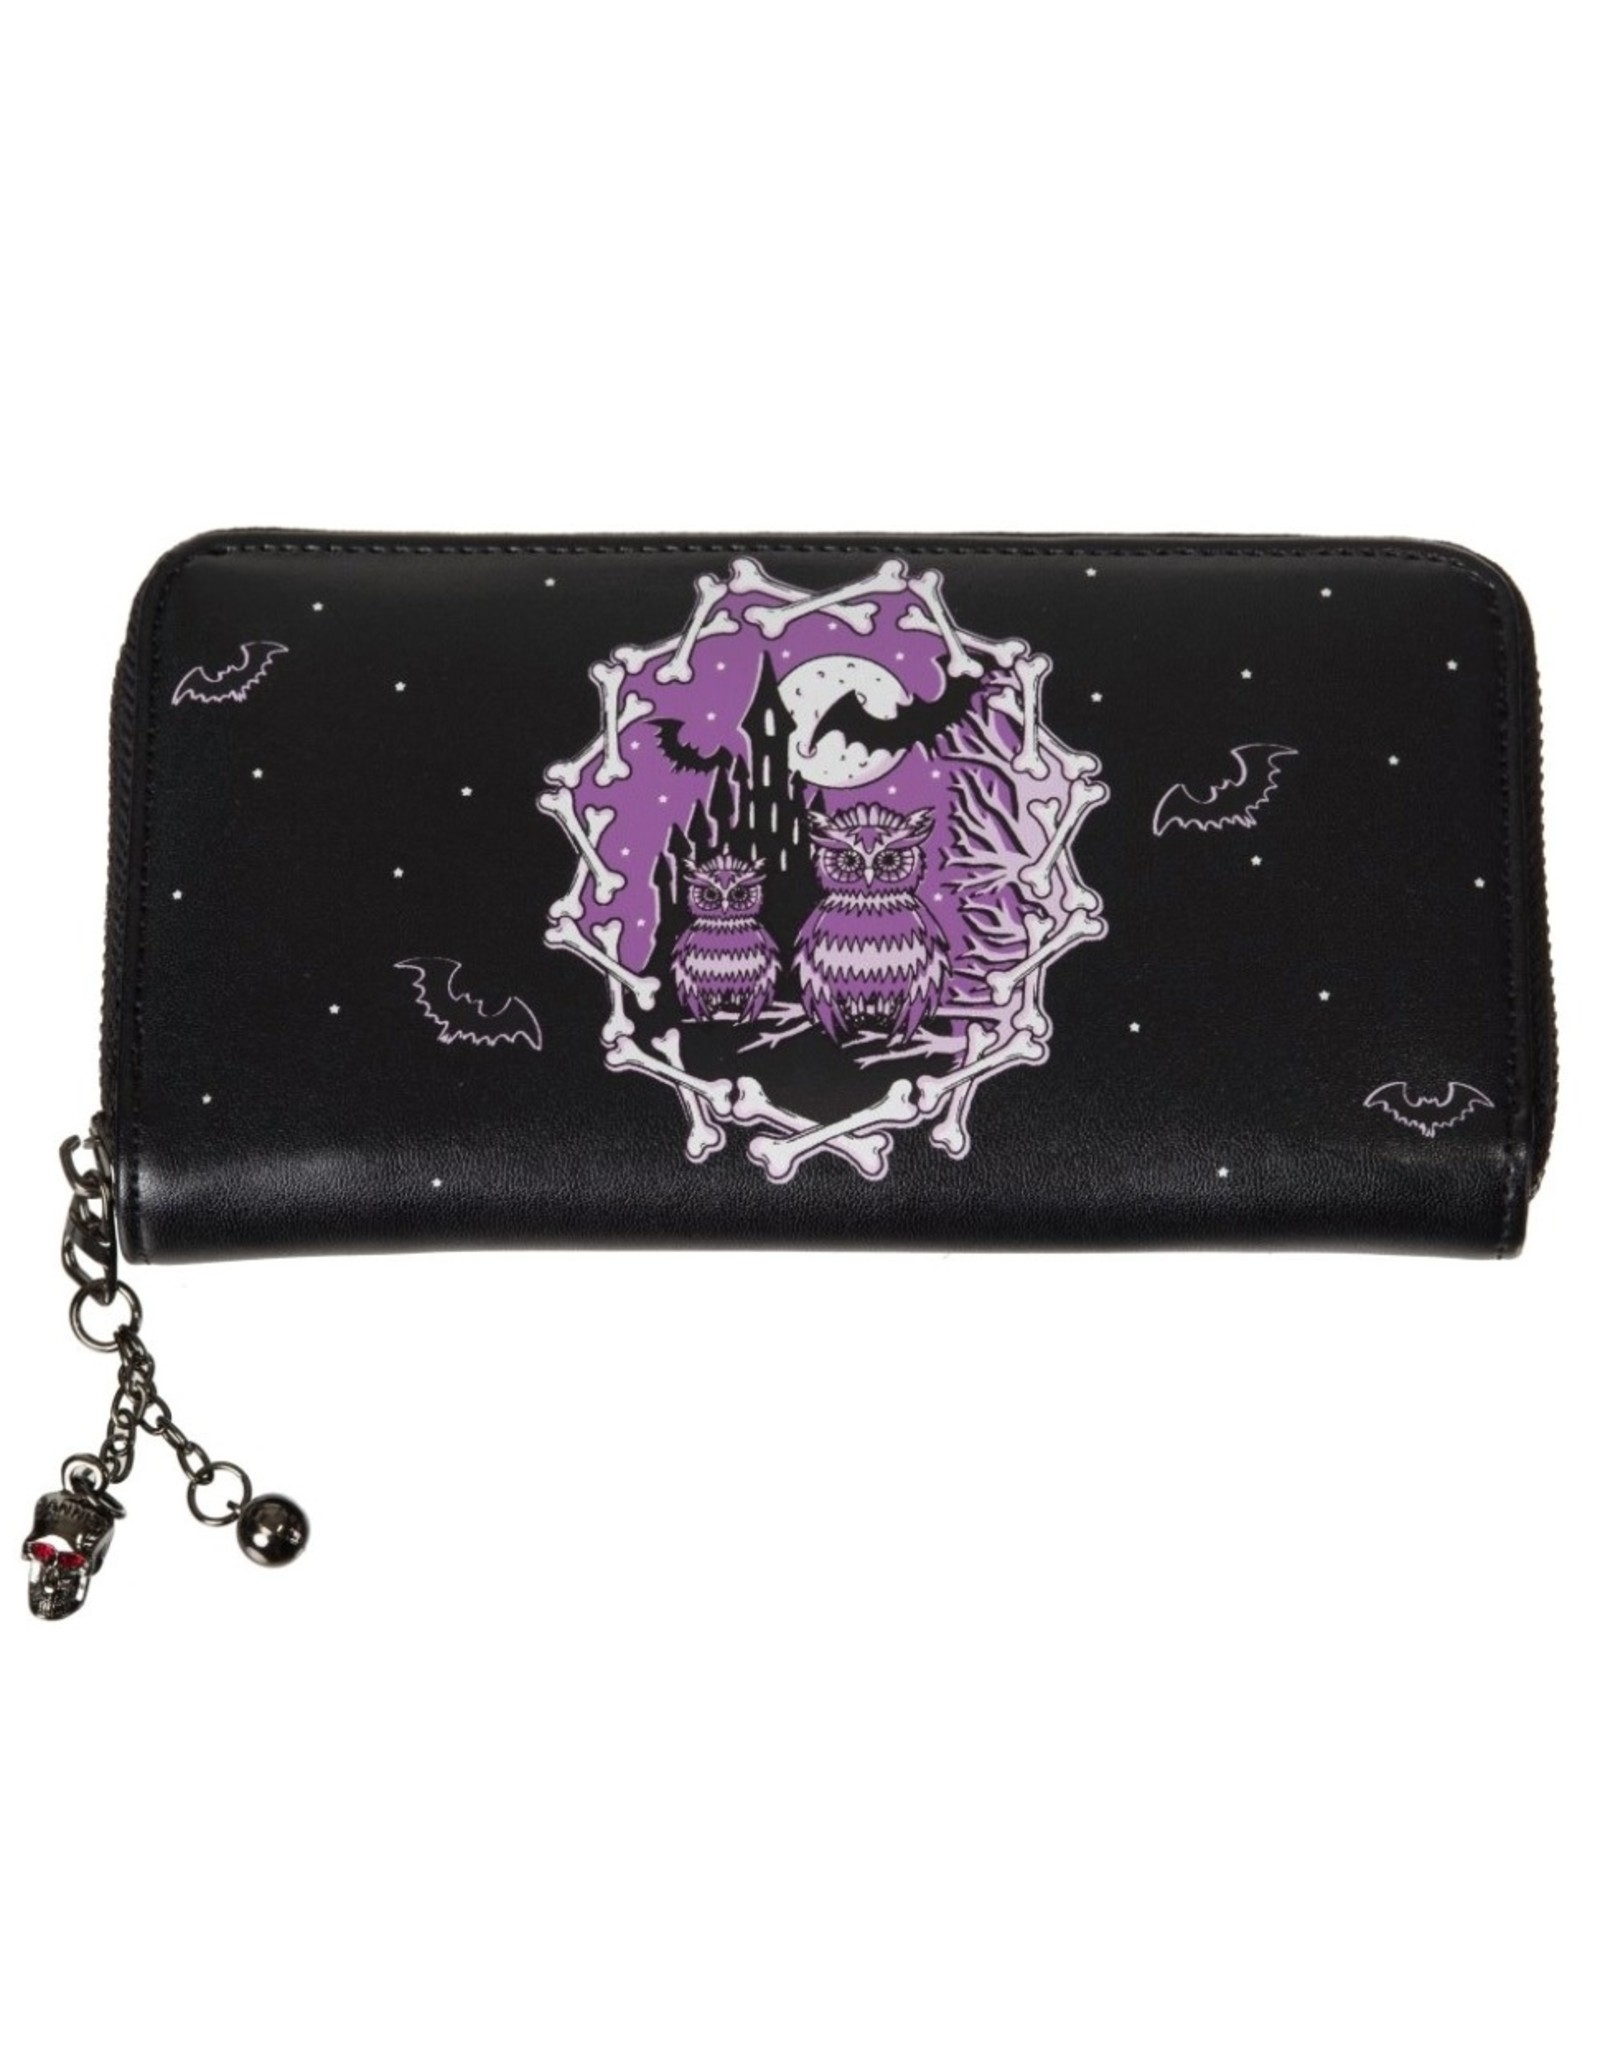 Banned Fantasy wallets and purses - Secret Obsession Wallet with Owls and Bats